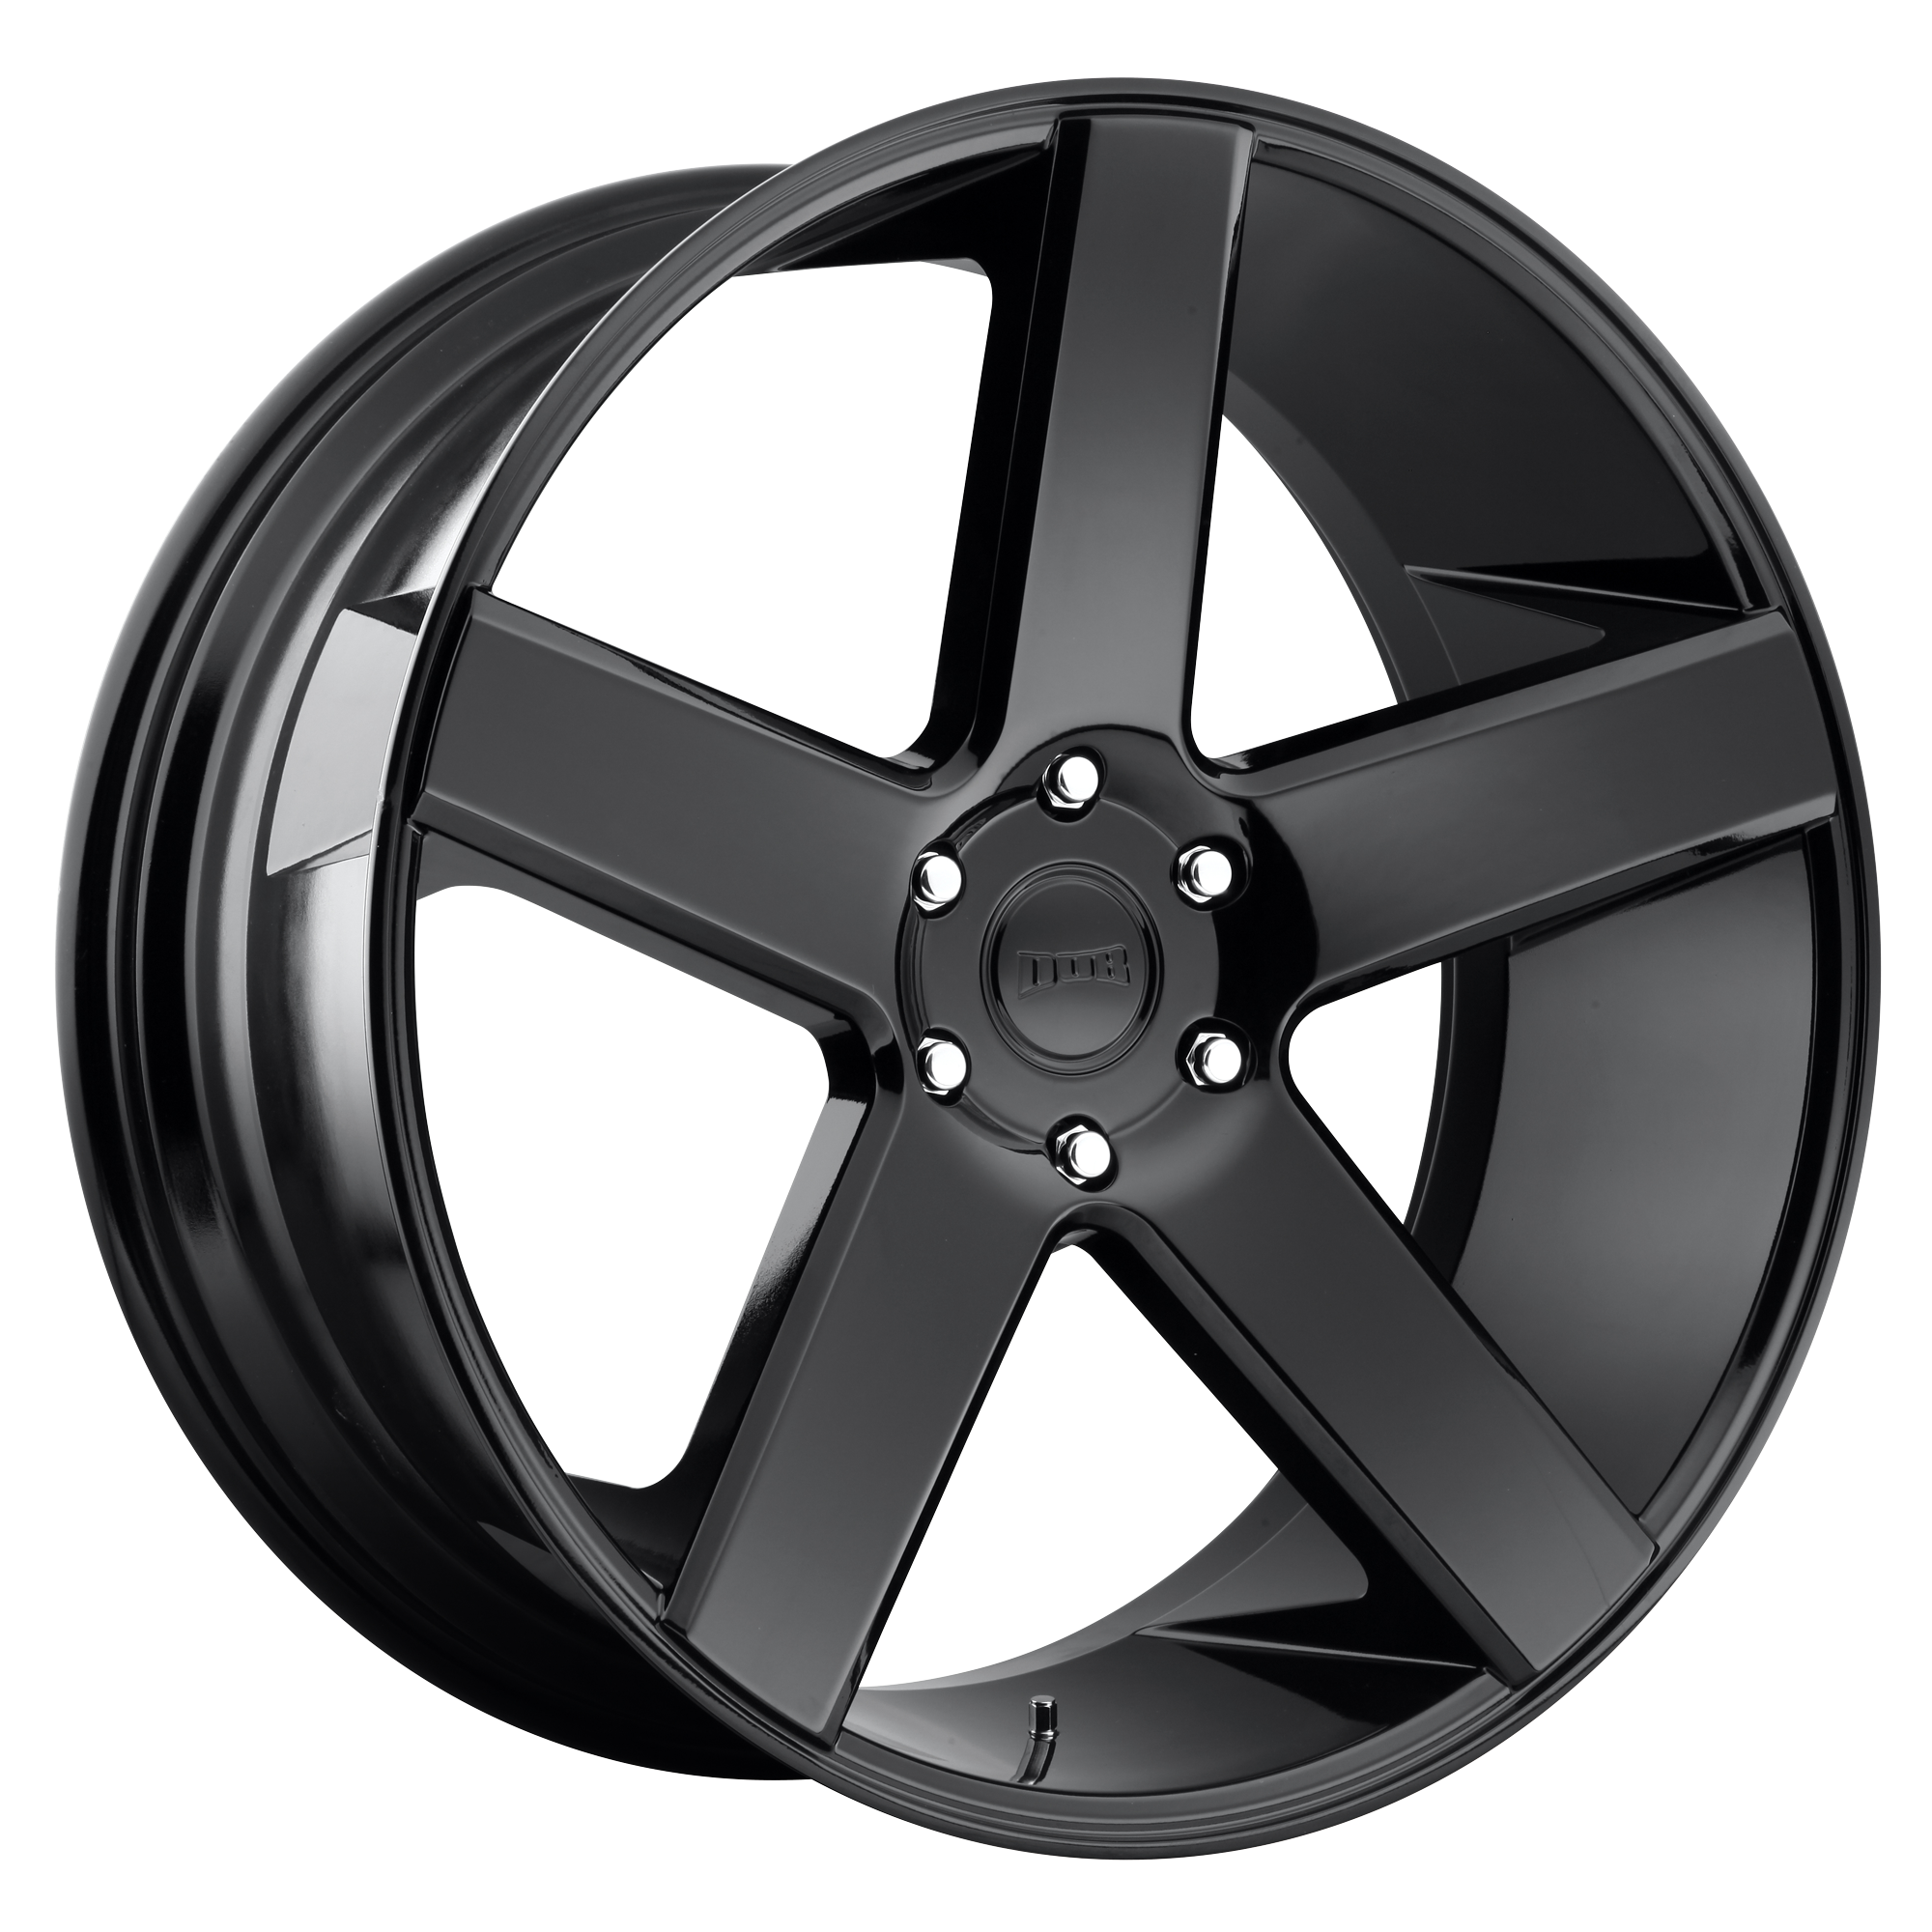 BALLER 22x9.5 6x139.70 GLOSS BLACK (19 mm) - Tires and Engine Performance